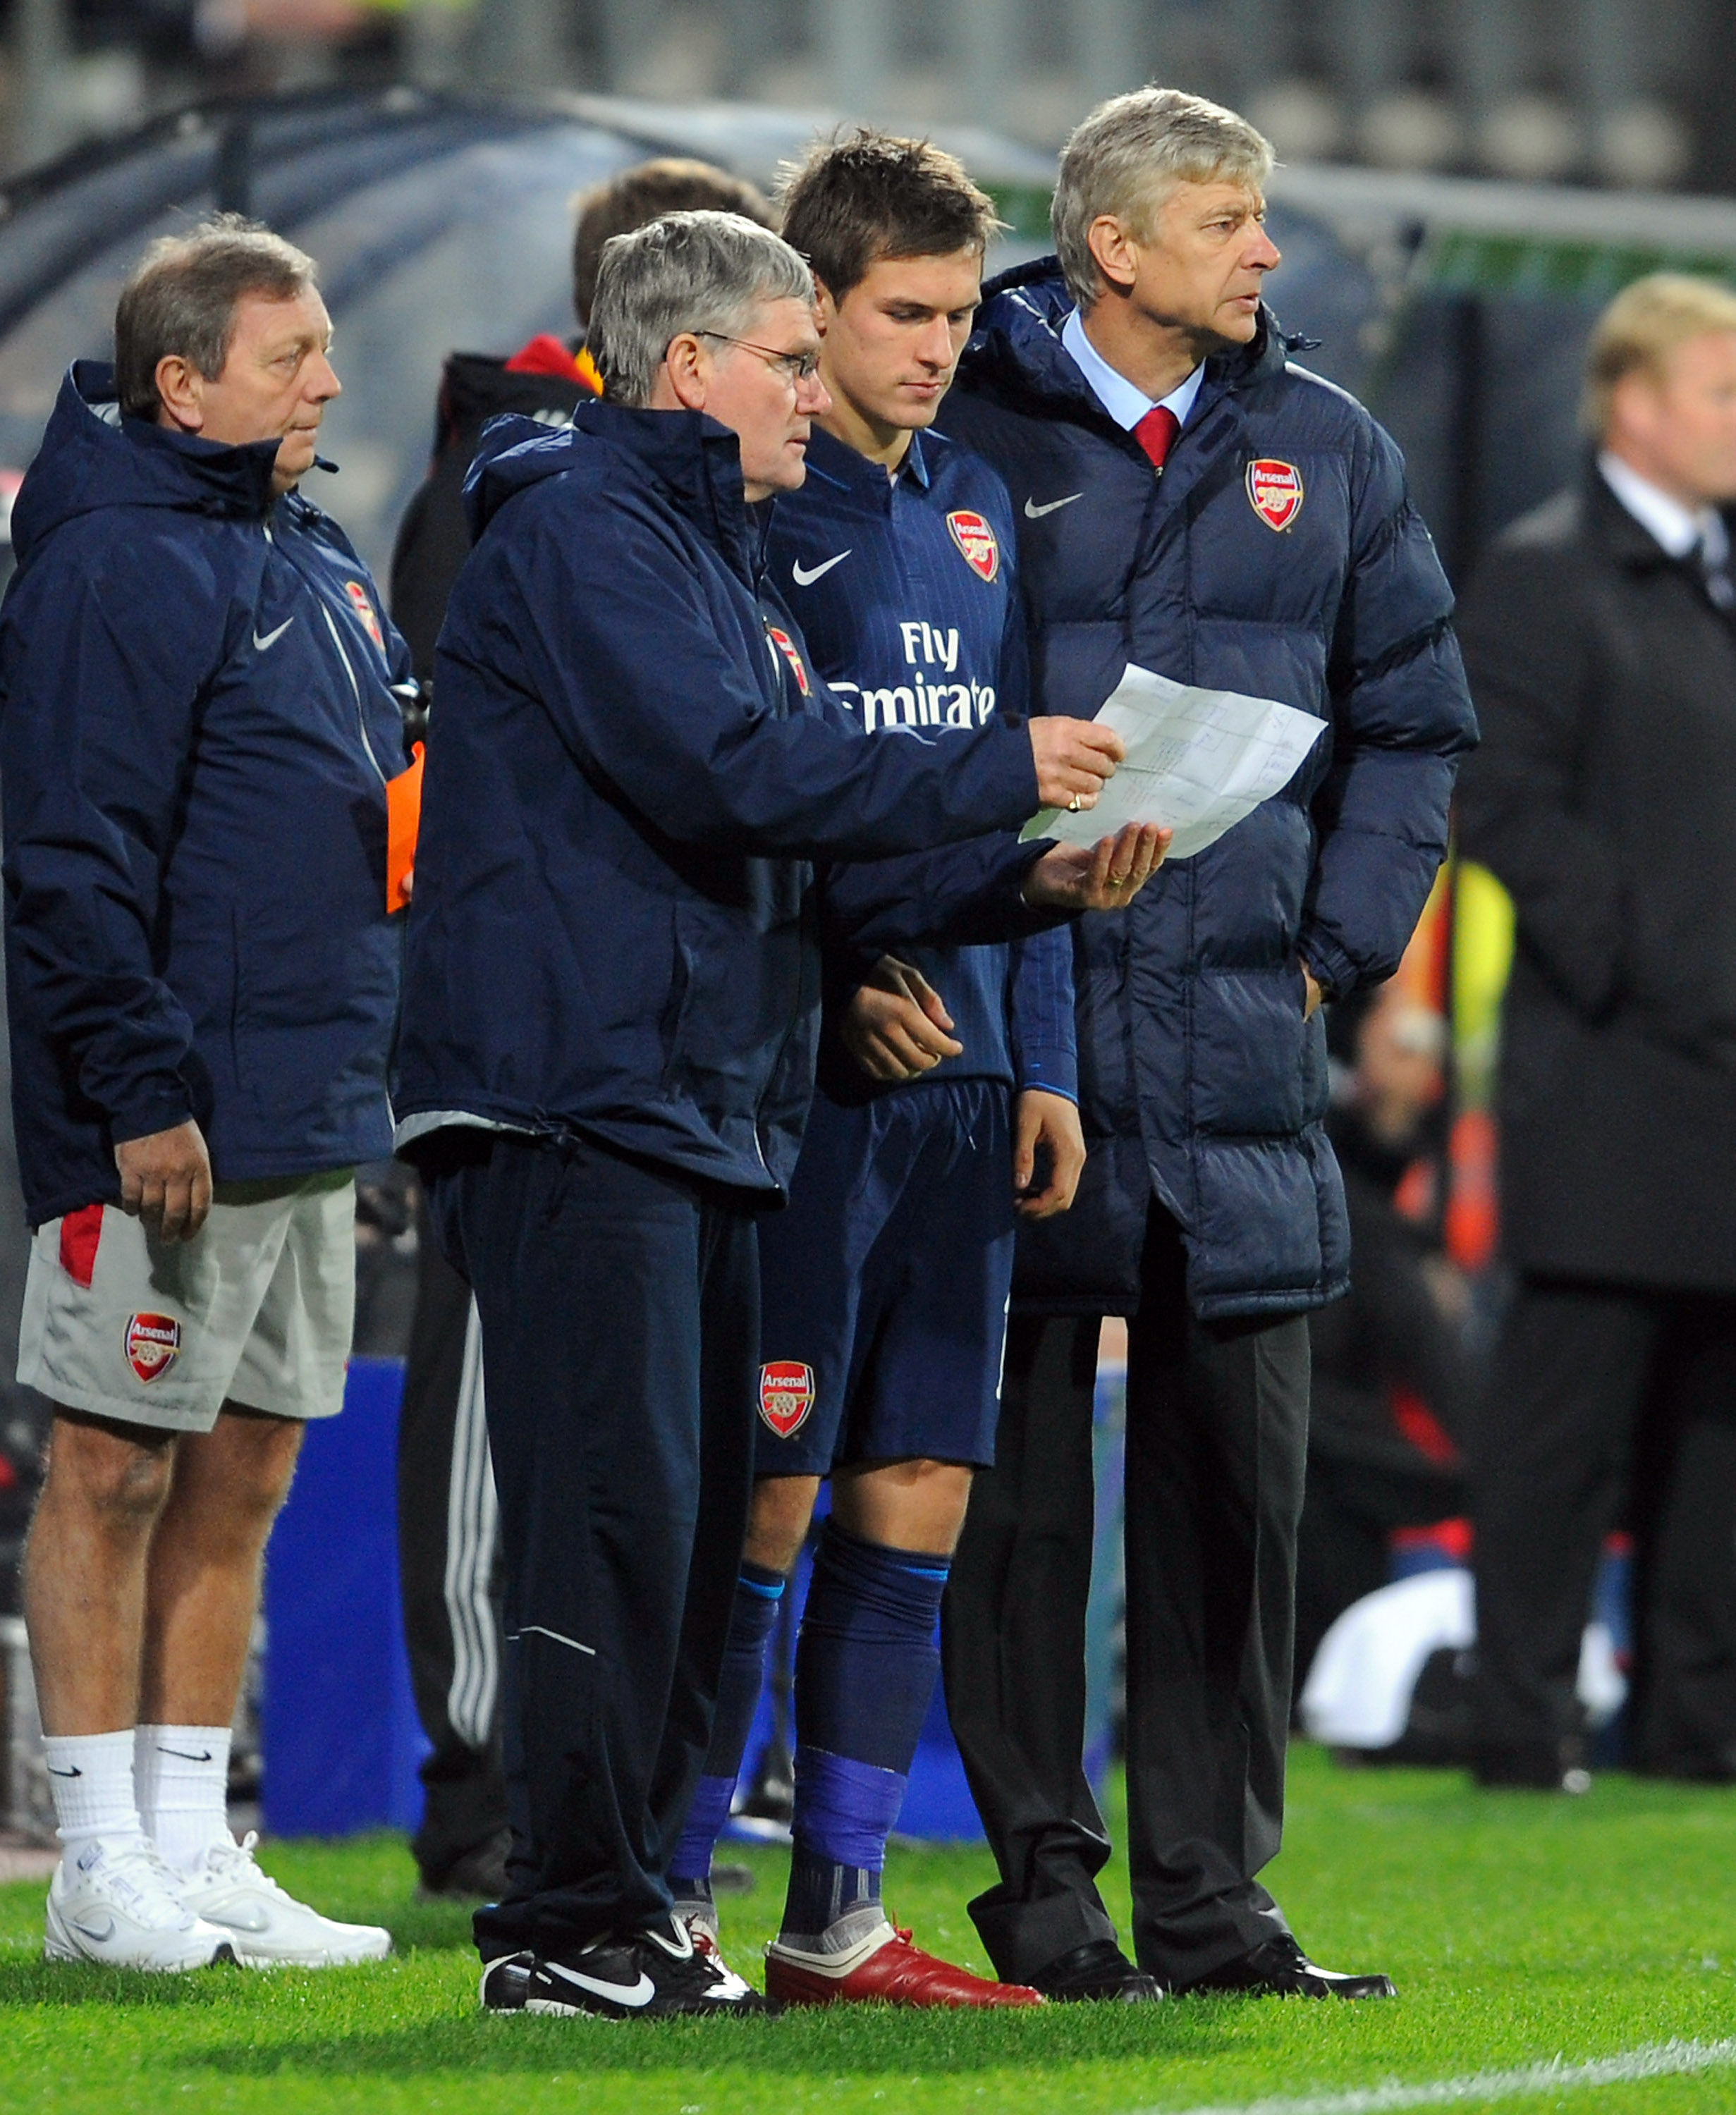 ALKMAAR, NETHERLANDS - OCTOBER 20: Arsenal's Pat Rice and Arsene Wenger give instructions to Aaron Ramsey before sending him on as a substitute during the UEFA Champions League Group H match between AZ Alkmaar and Arsenal at the DSB Stadium on October 20,